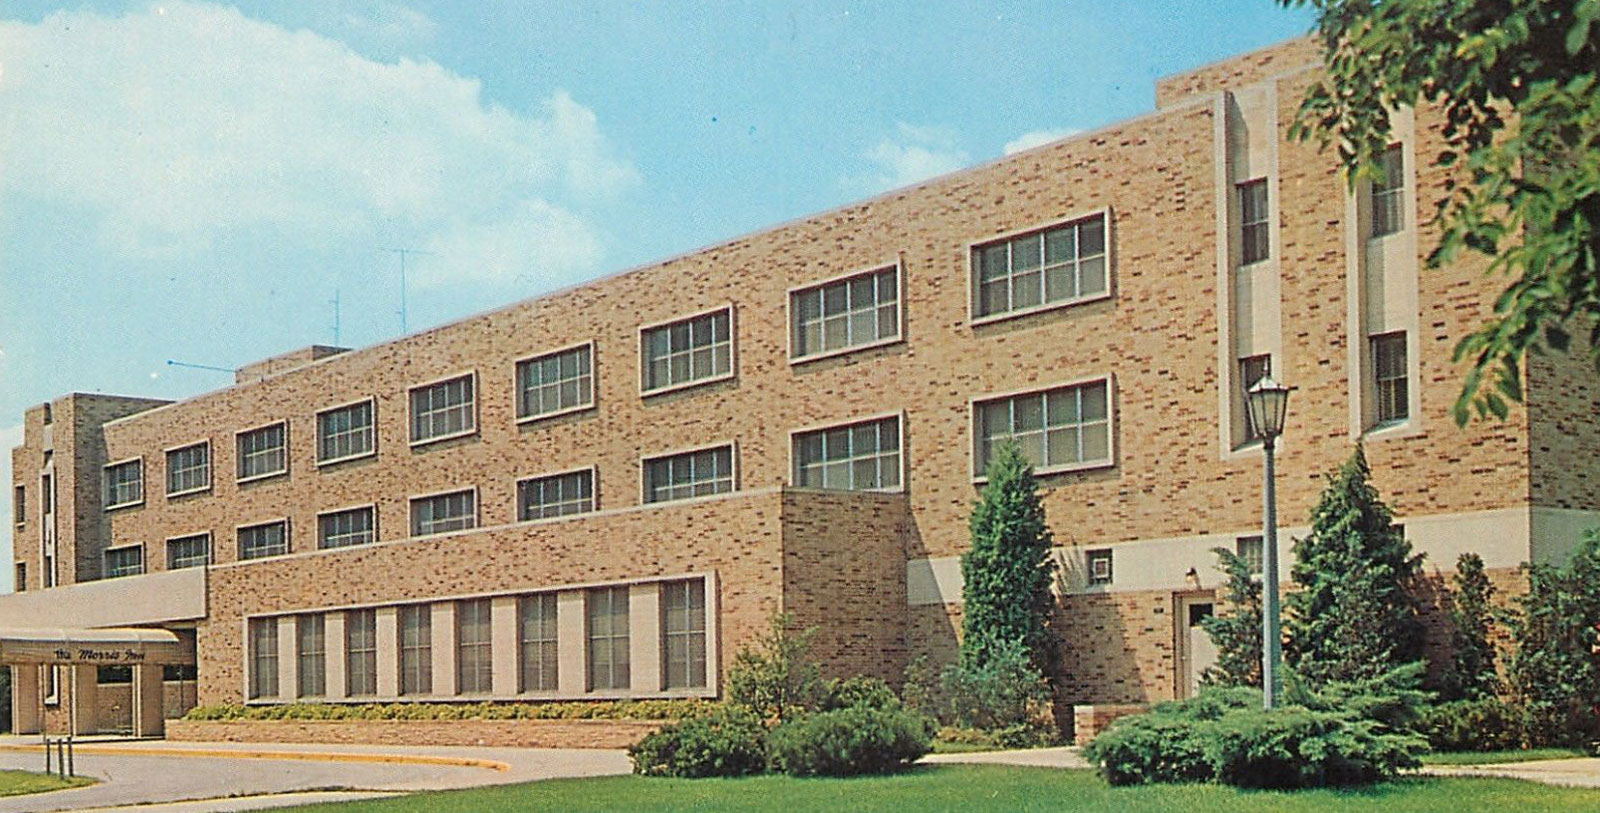 Image of Vintage 1950s Postcard depicting hotel exterior, Morris Inn at Notre Dame in South Bend, Indiana, 1952, Member of Historic Hotels of America, Discover